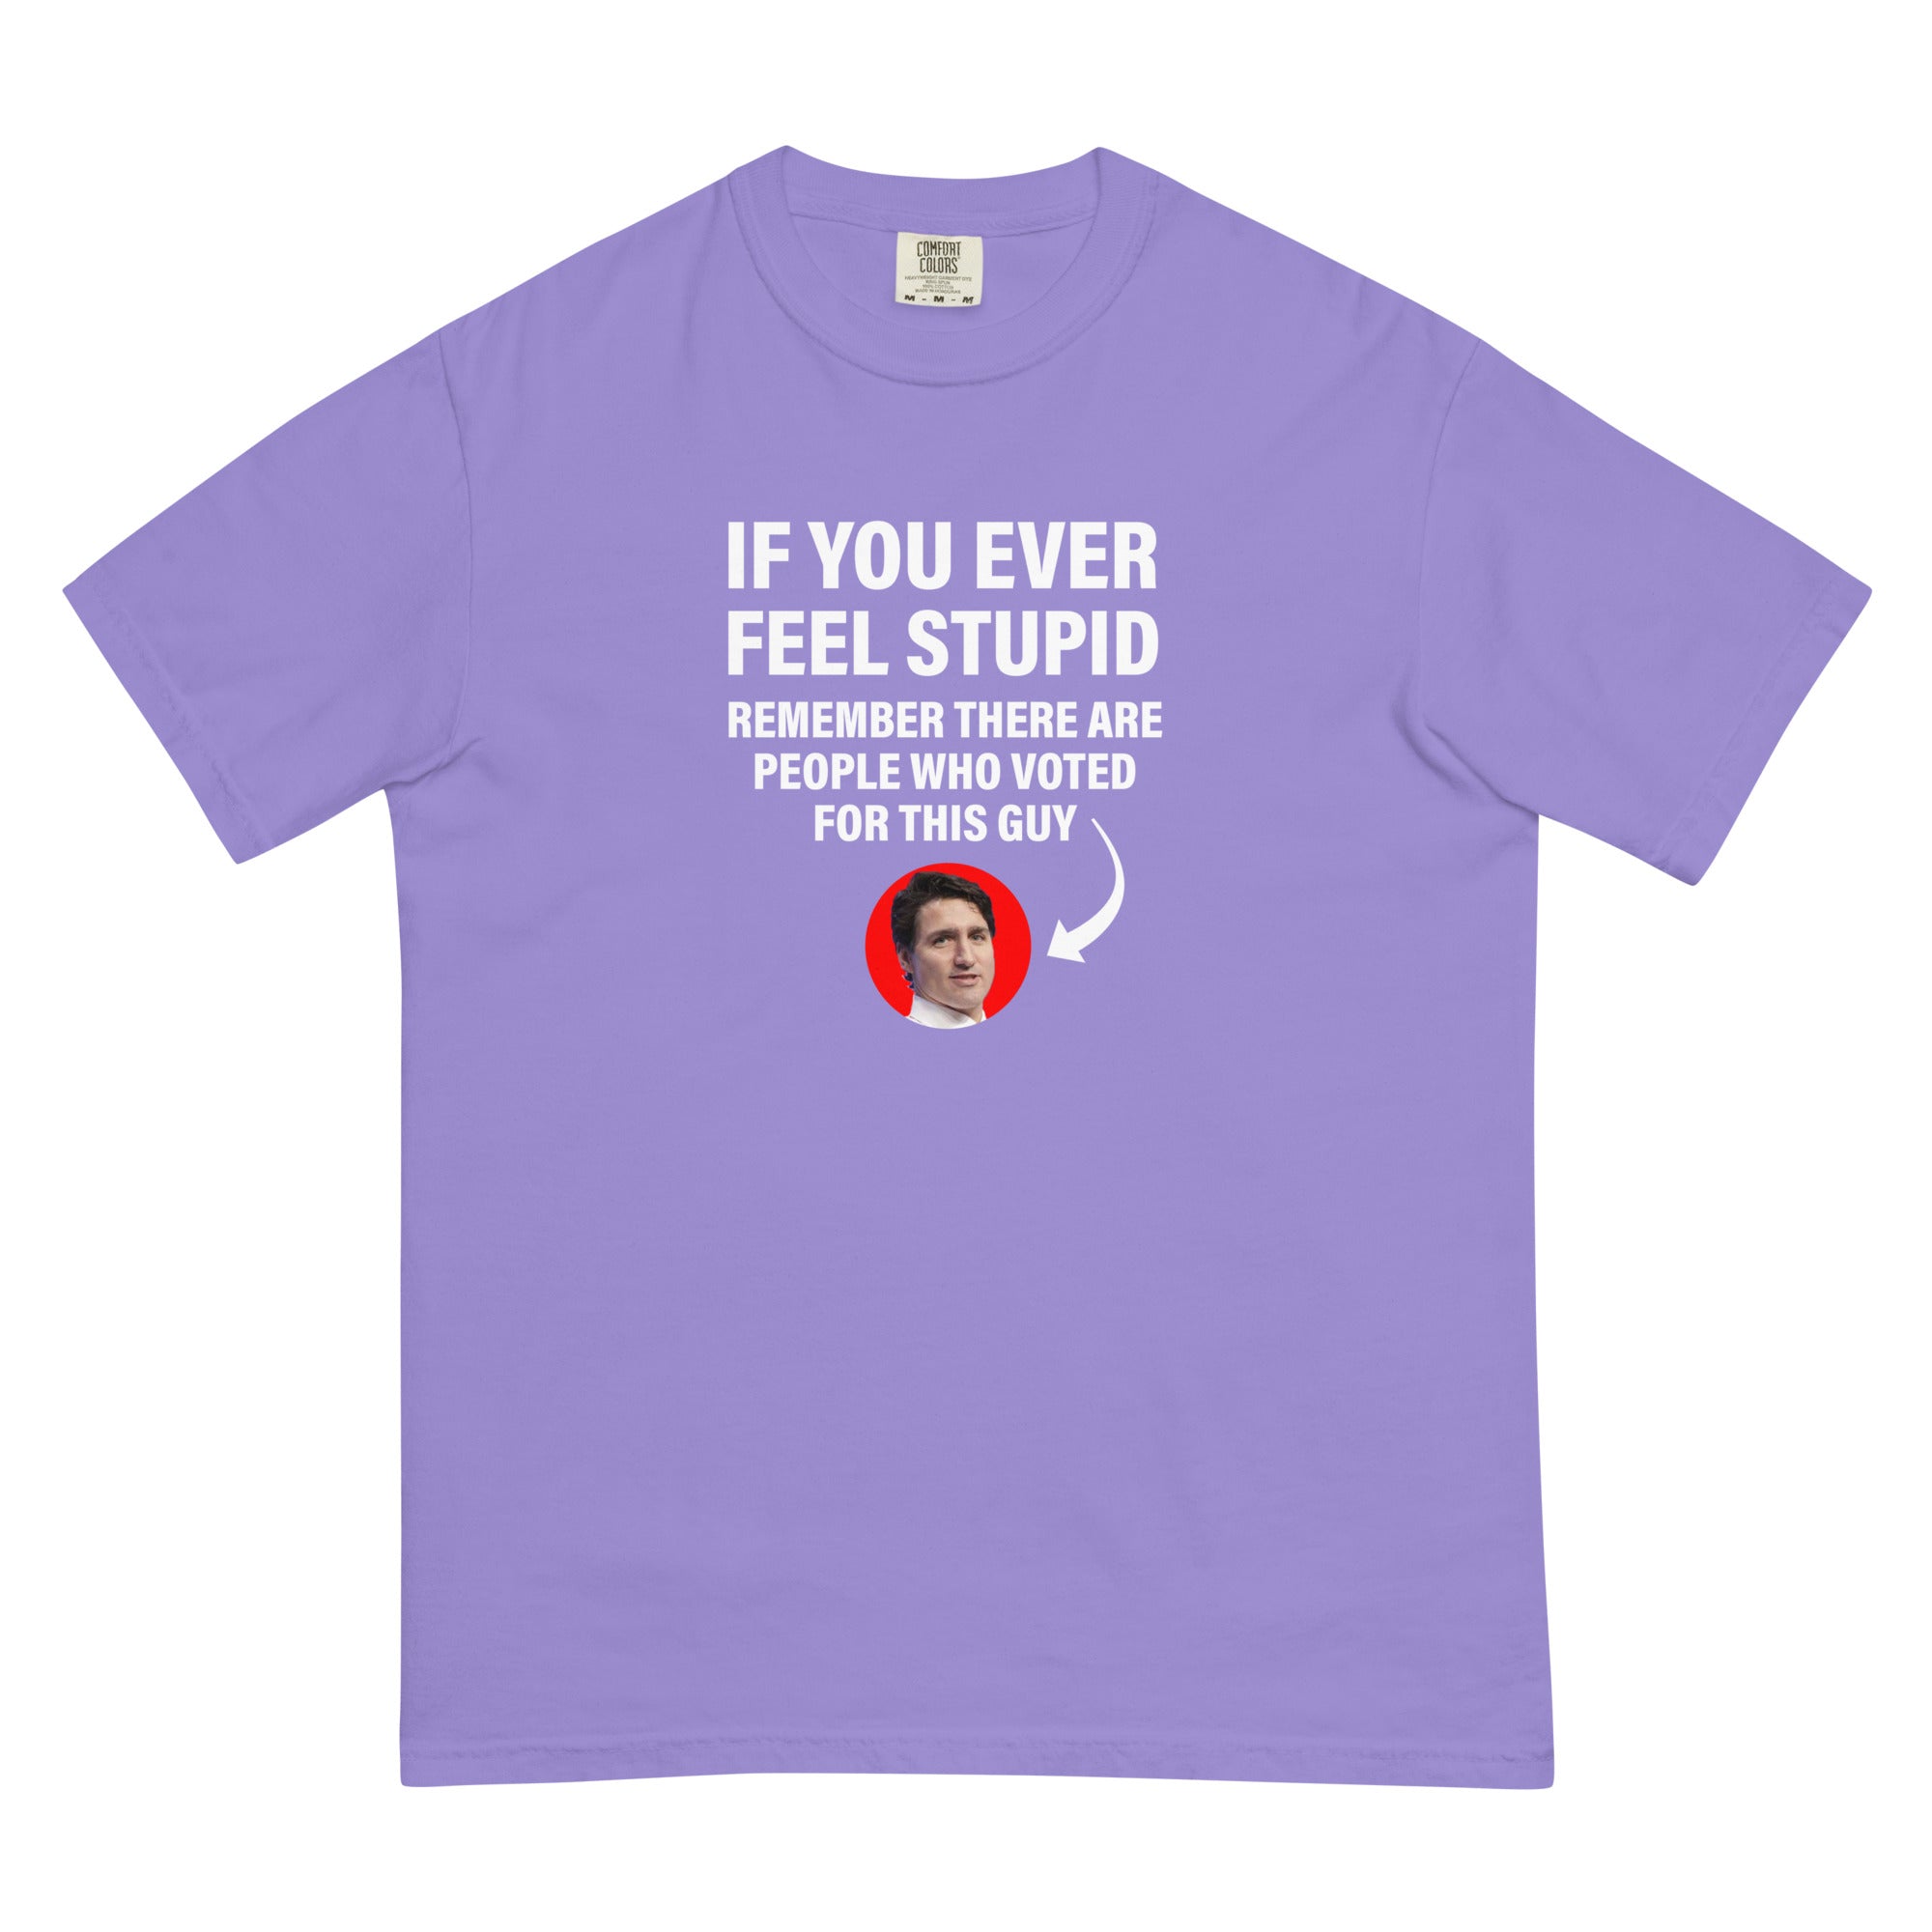 Men’s "If You Ever Feel Stupid" T-shirt